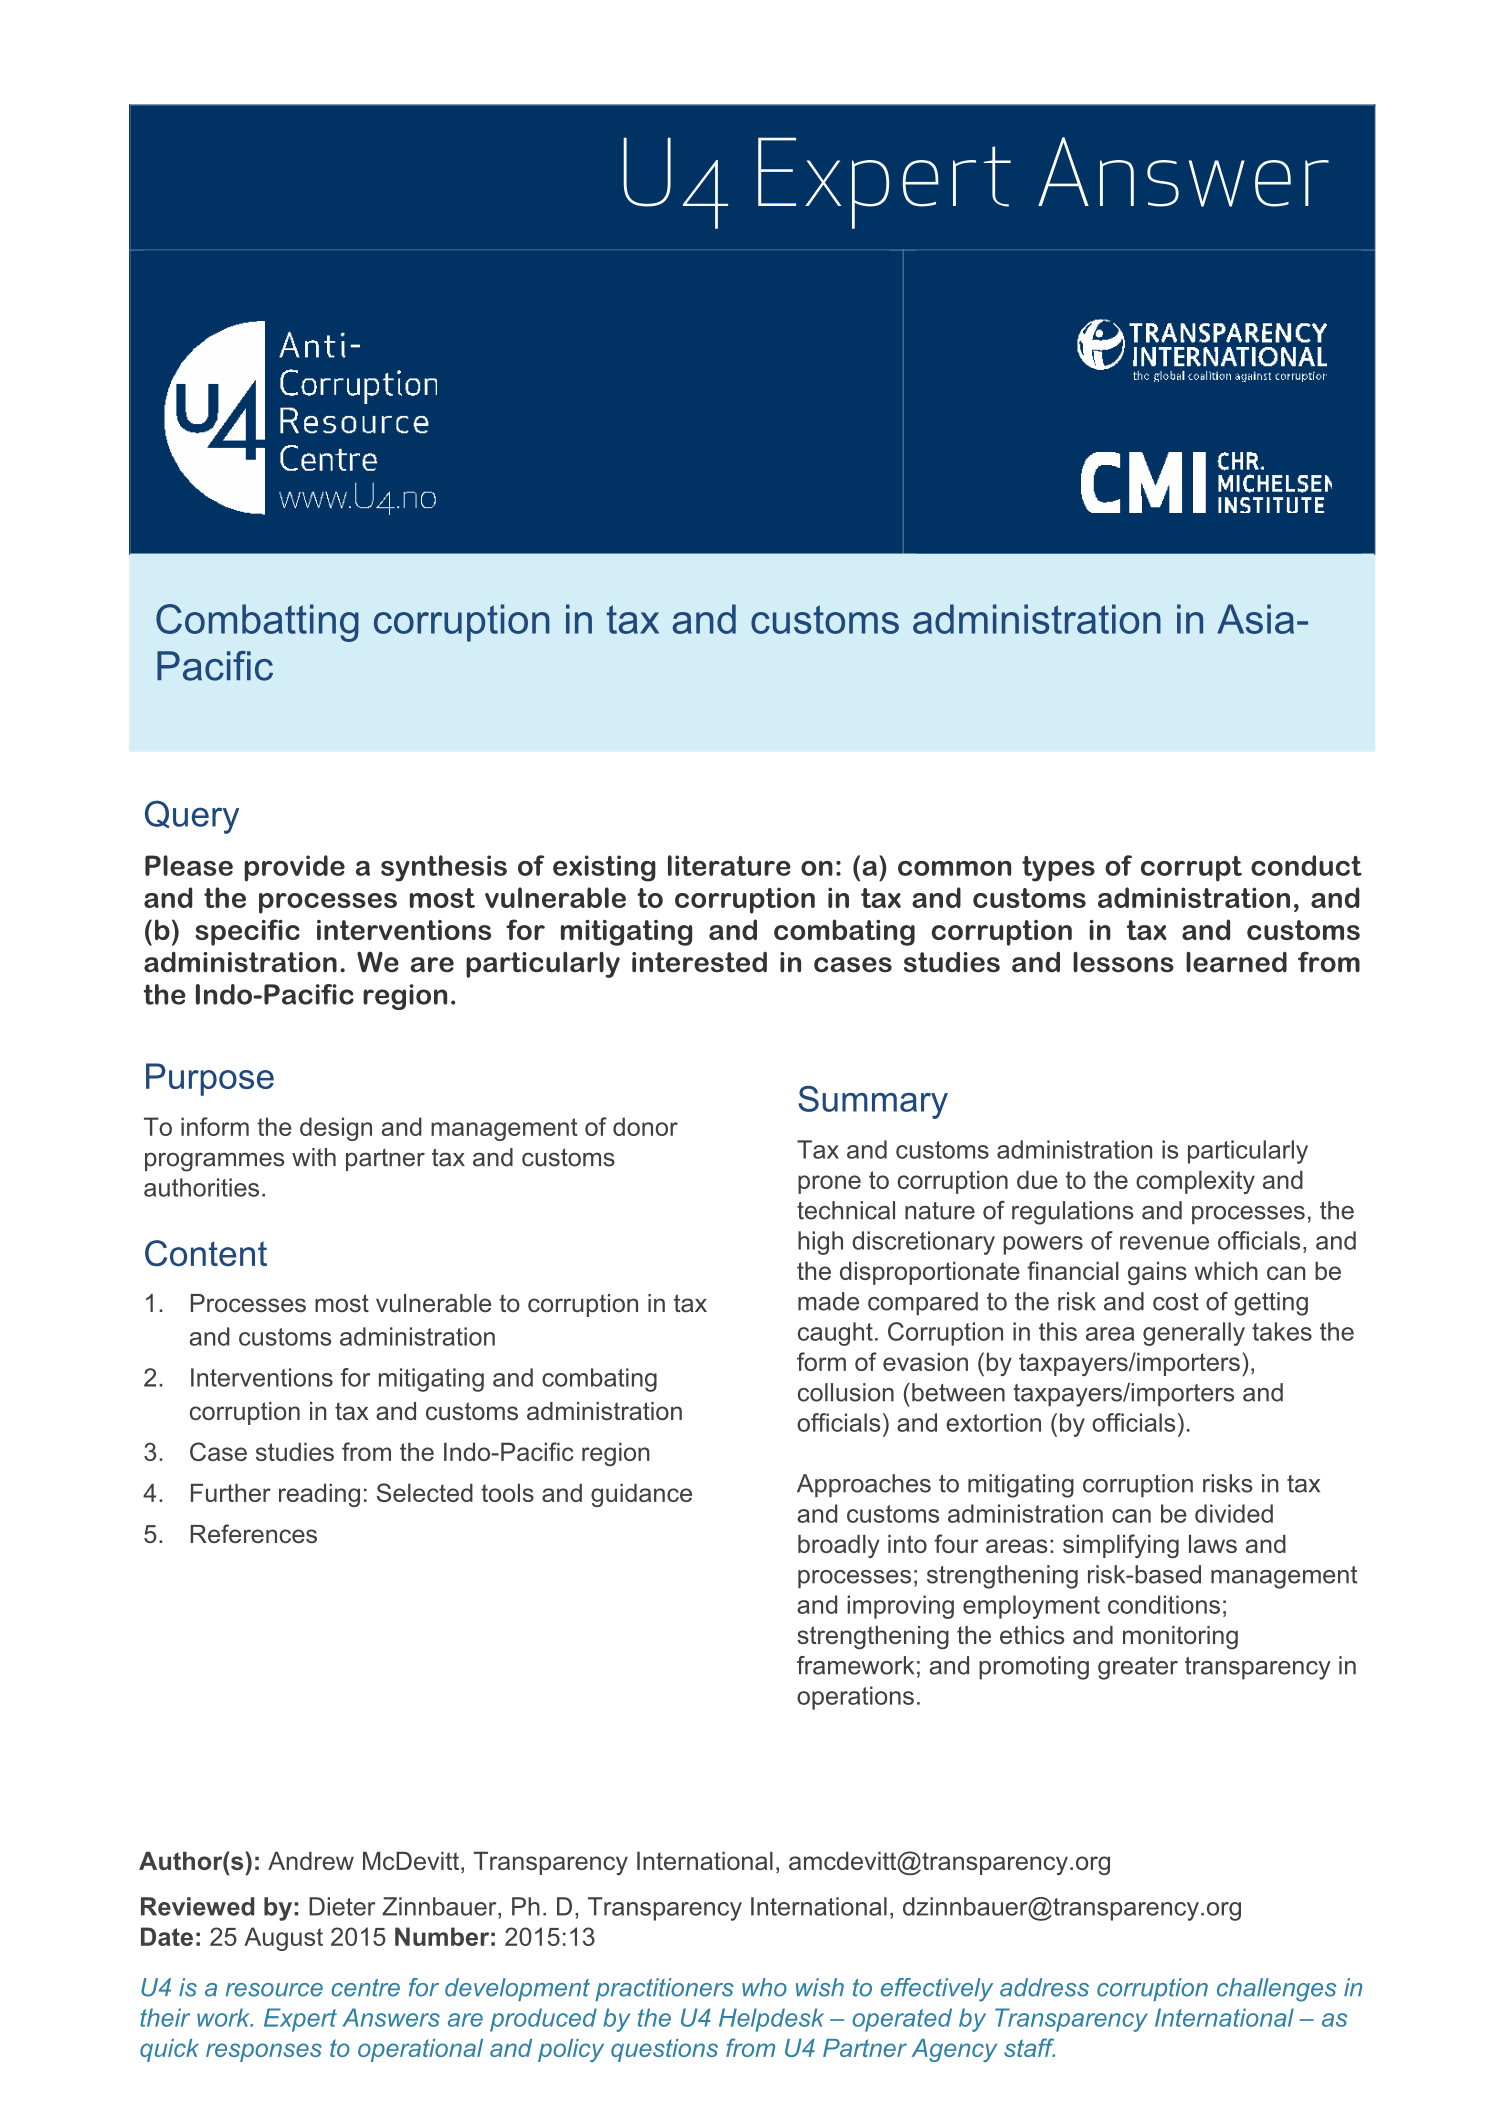 Combatting corruption in tax and customs administration in Asia-Pacific